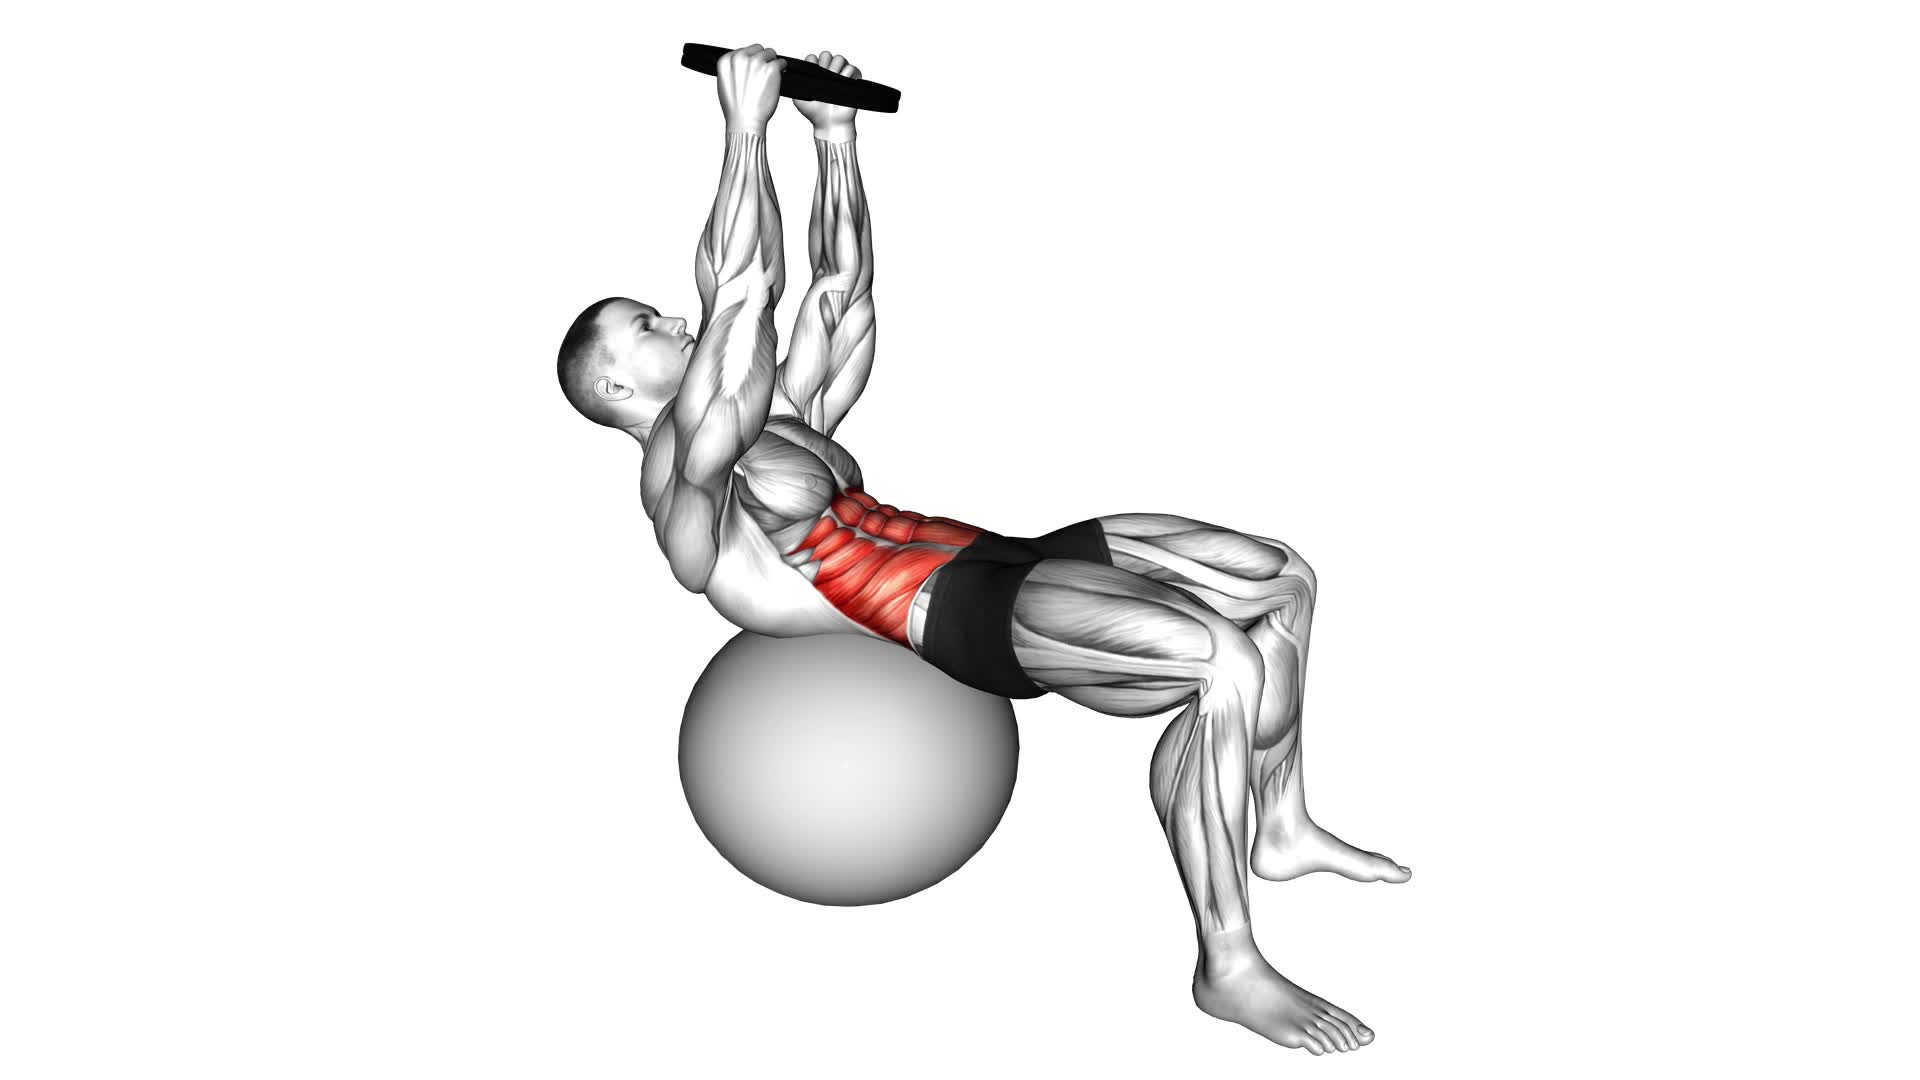 Weighted Overhead Crunch (On Stability Ball) - Video Exercise Guide & Tips